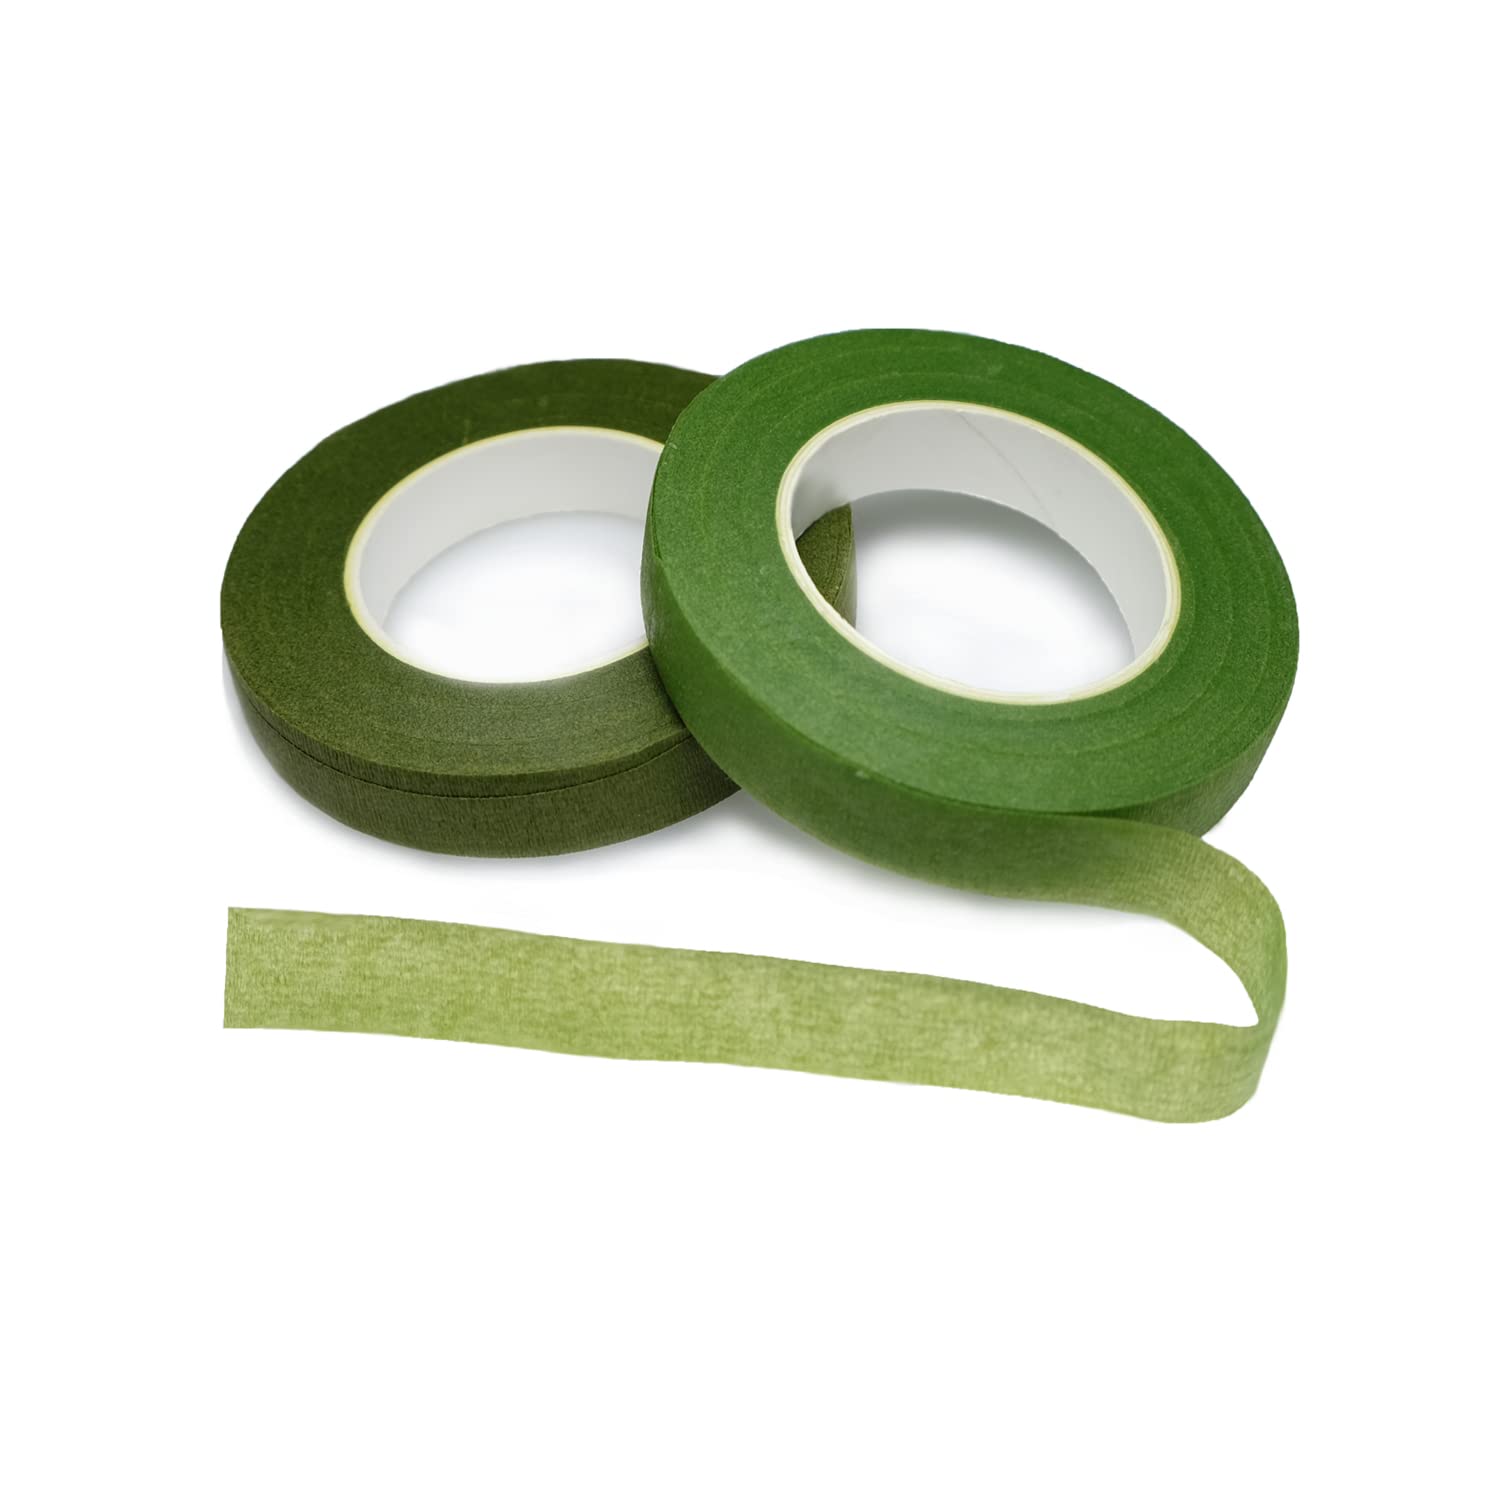 Moss Green Floral Tape, Flower making accessories